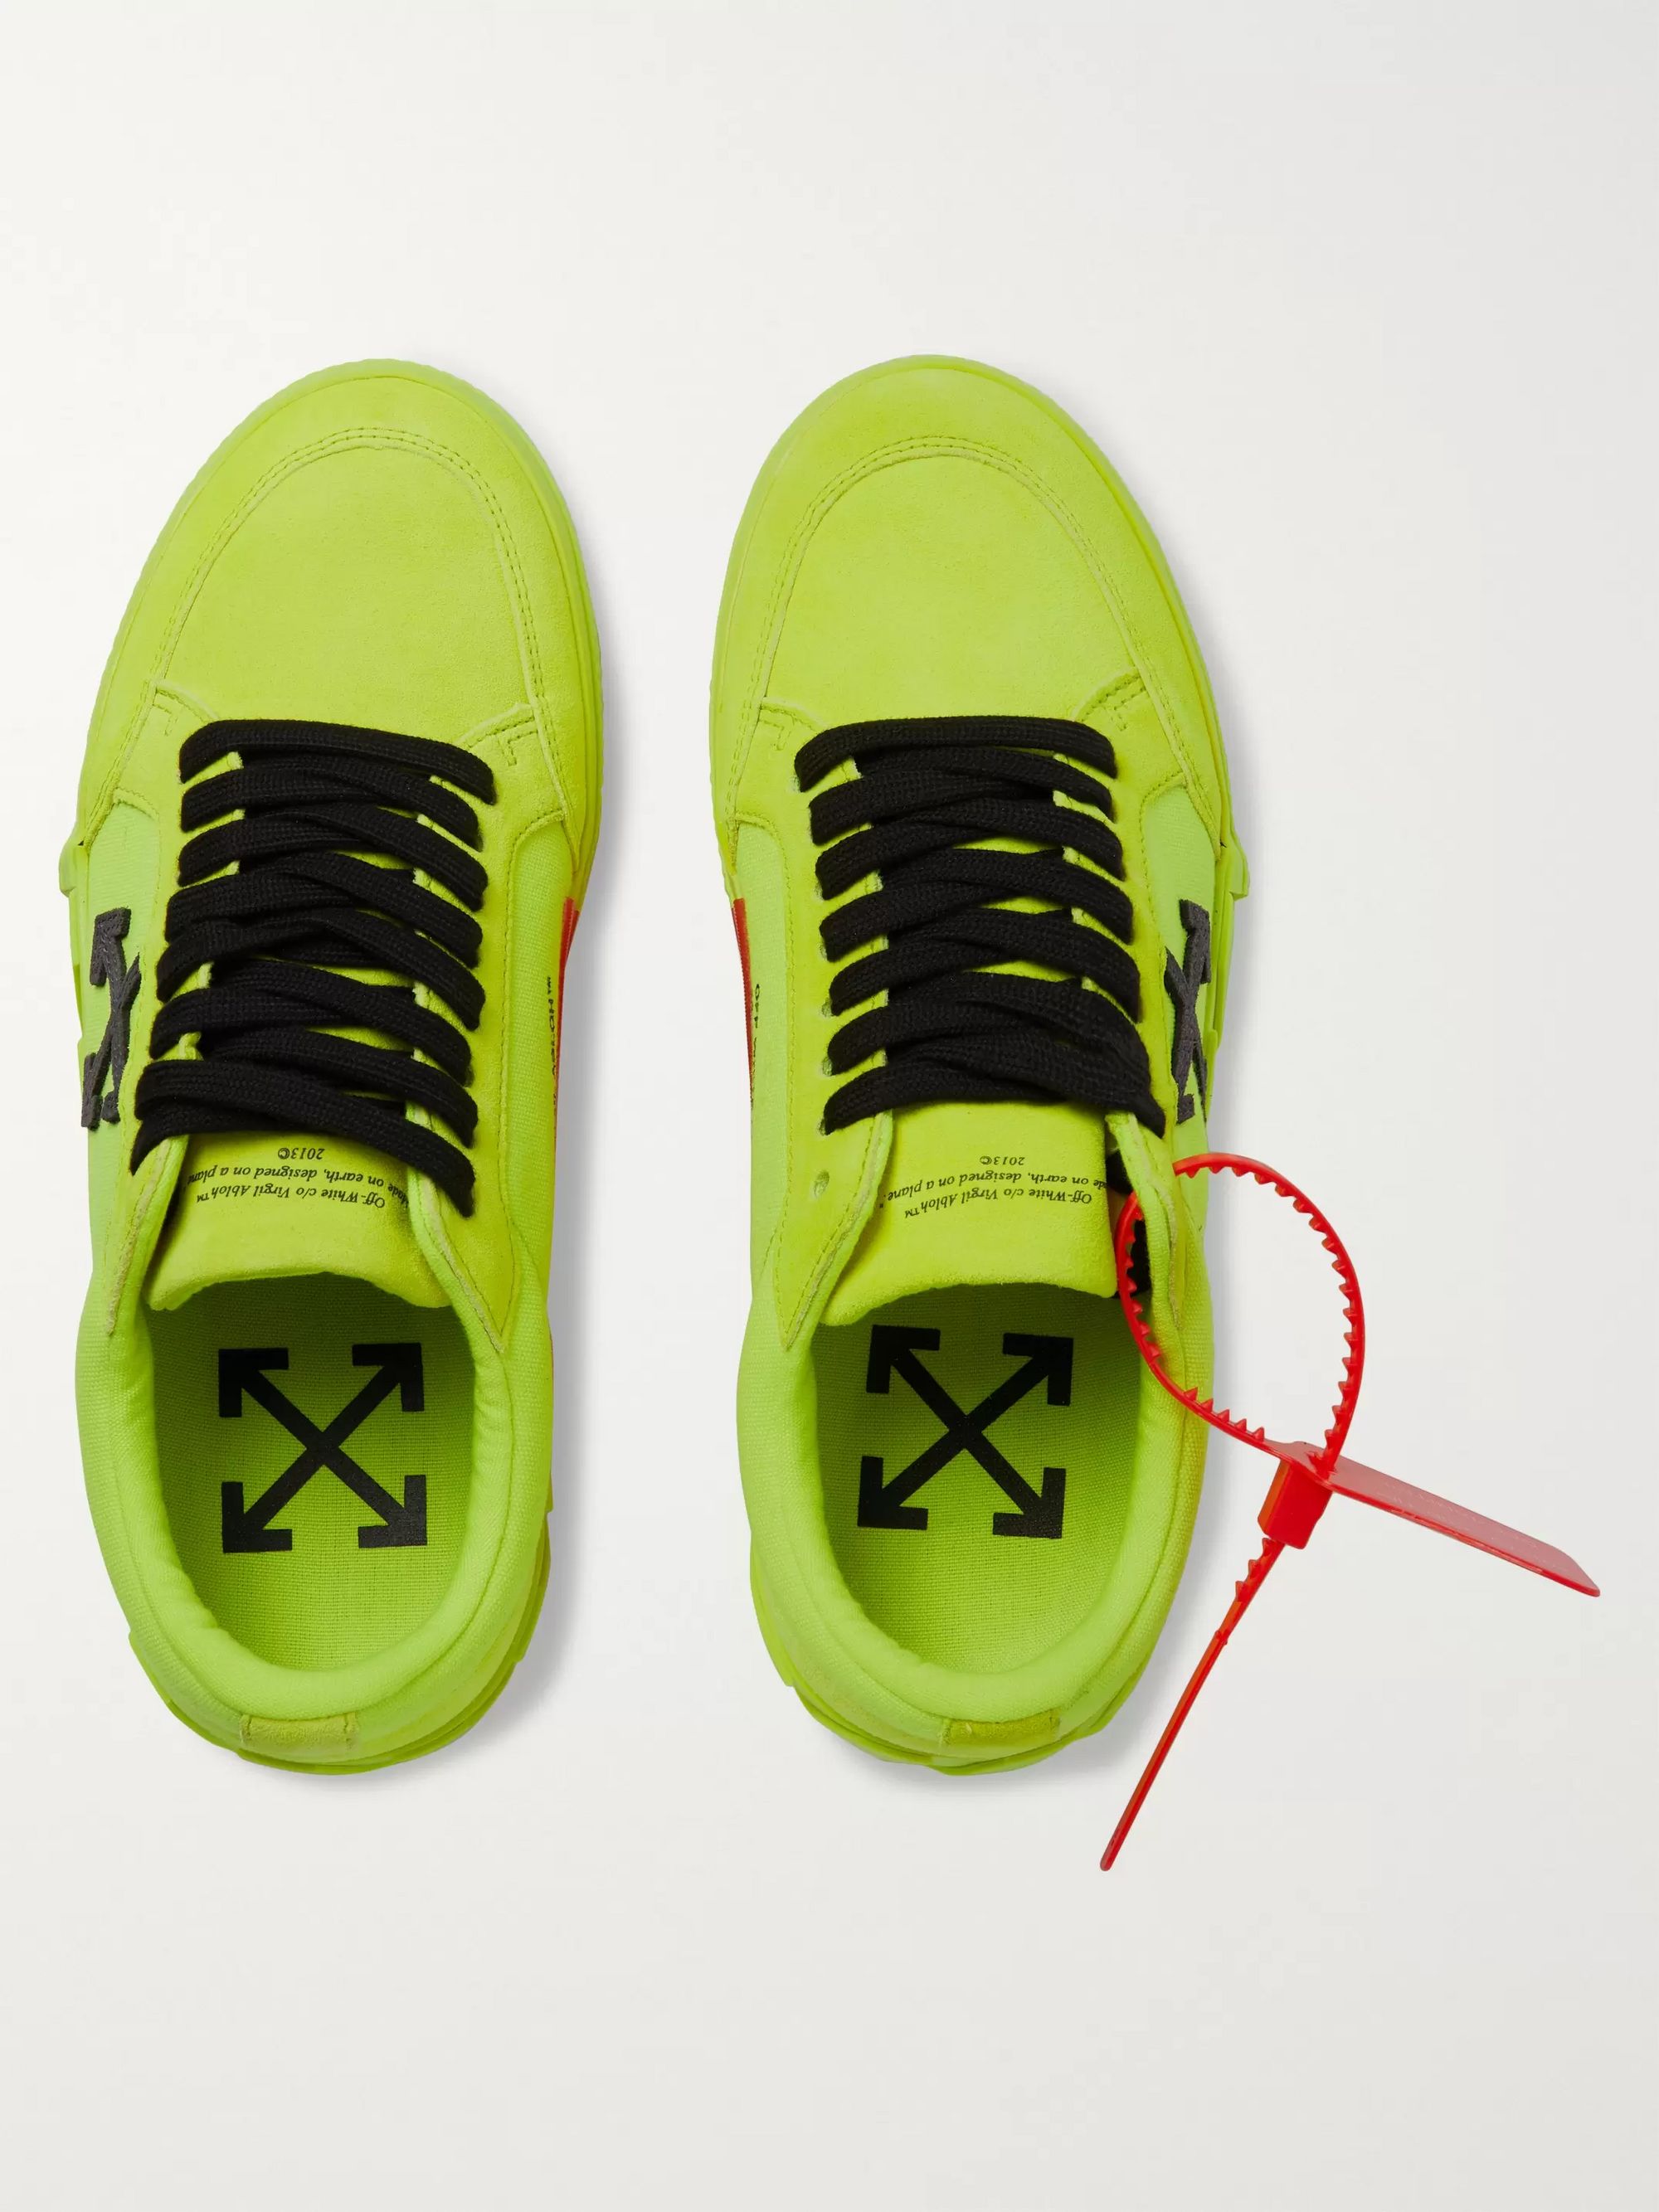 off white neon green sneakers